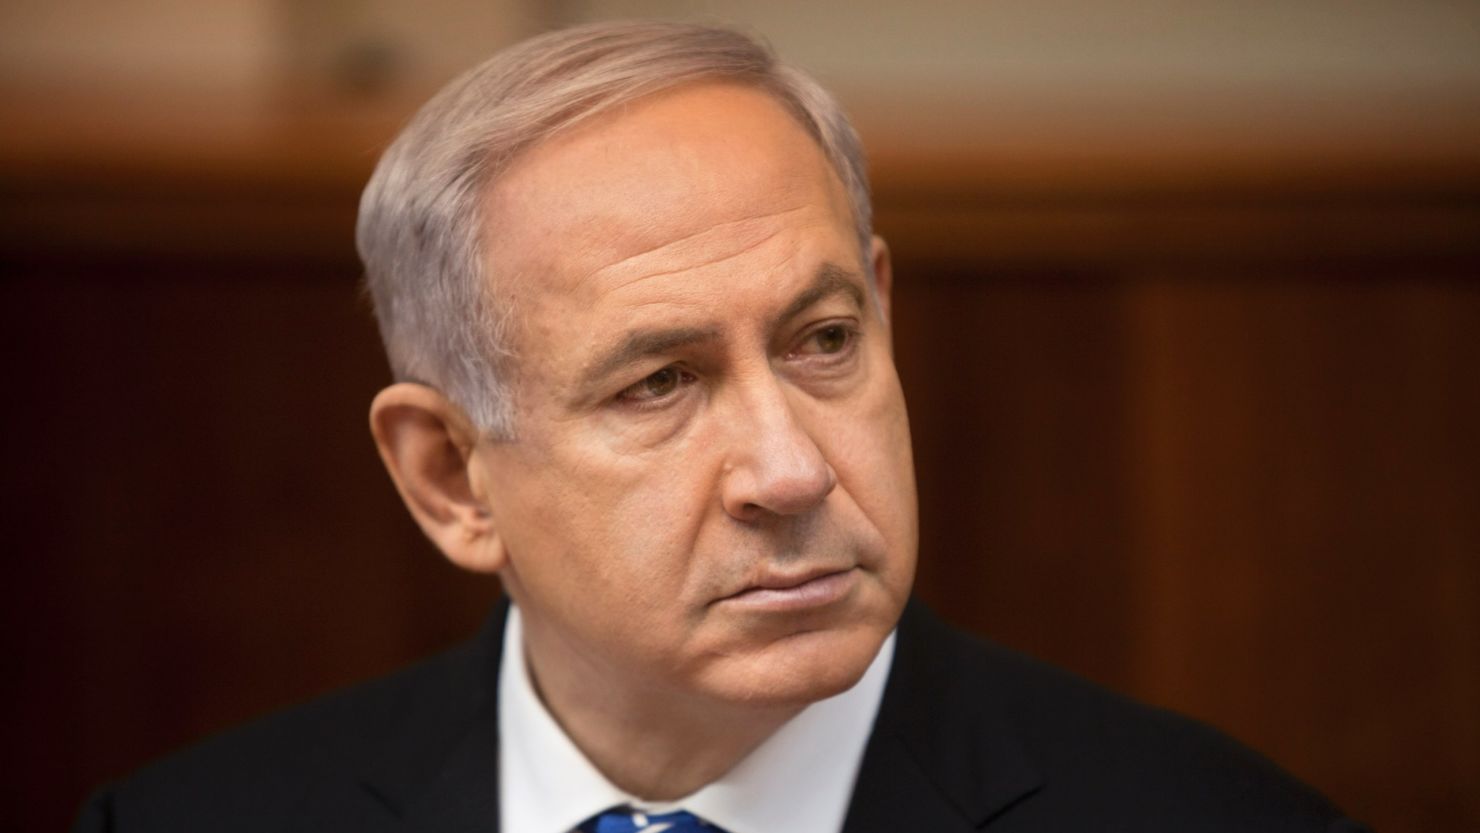 Israeli Prime Minister Benjamin Netanyahu attends the weekly cabinet meeting in his Jerusalem office, on March 10, 2013.